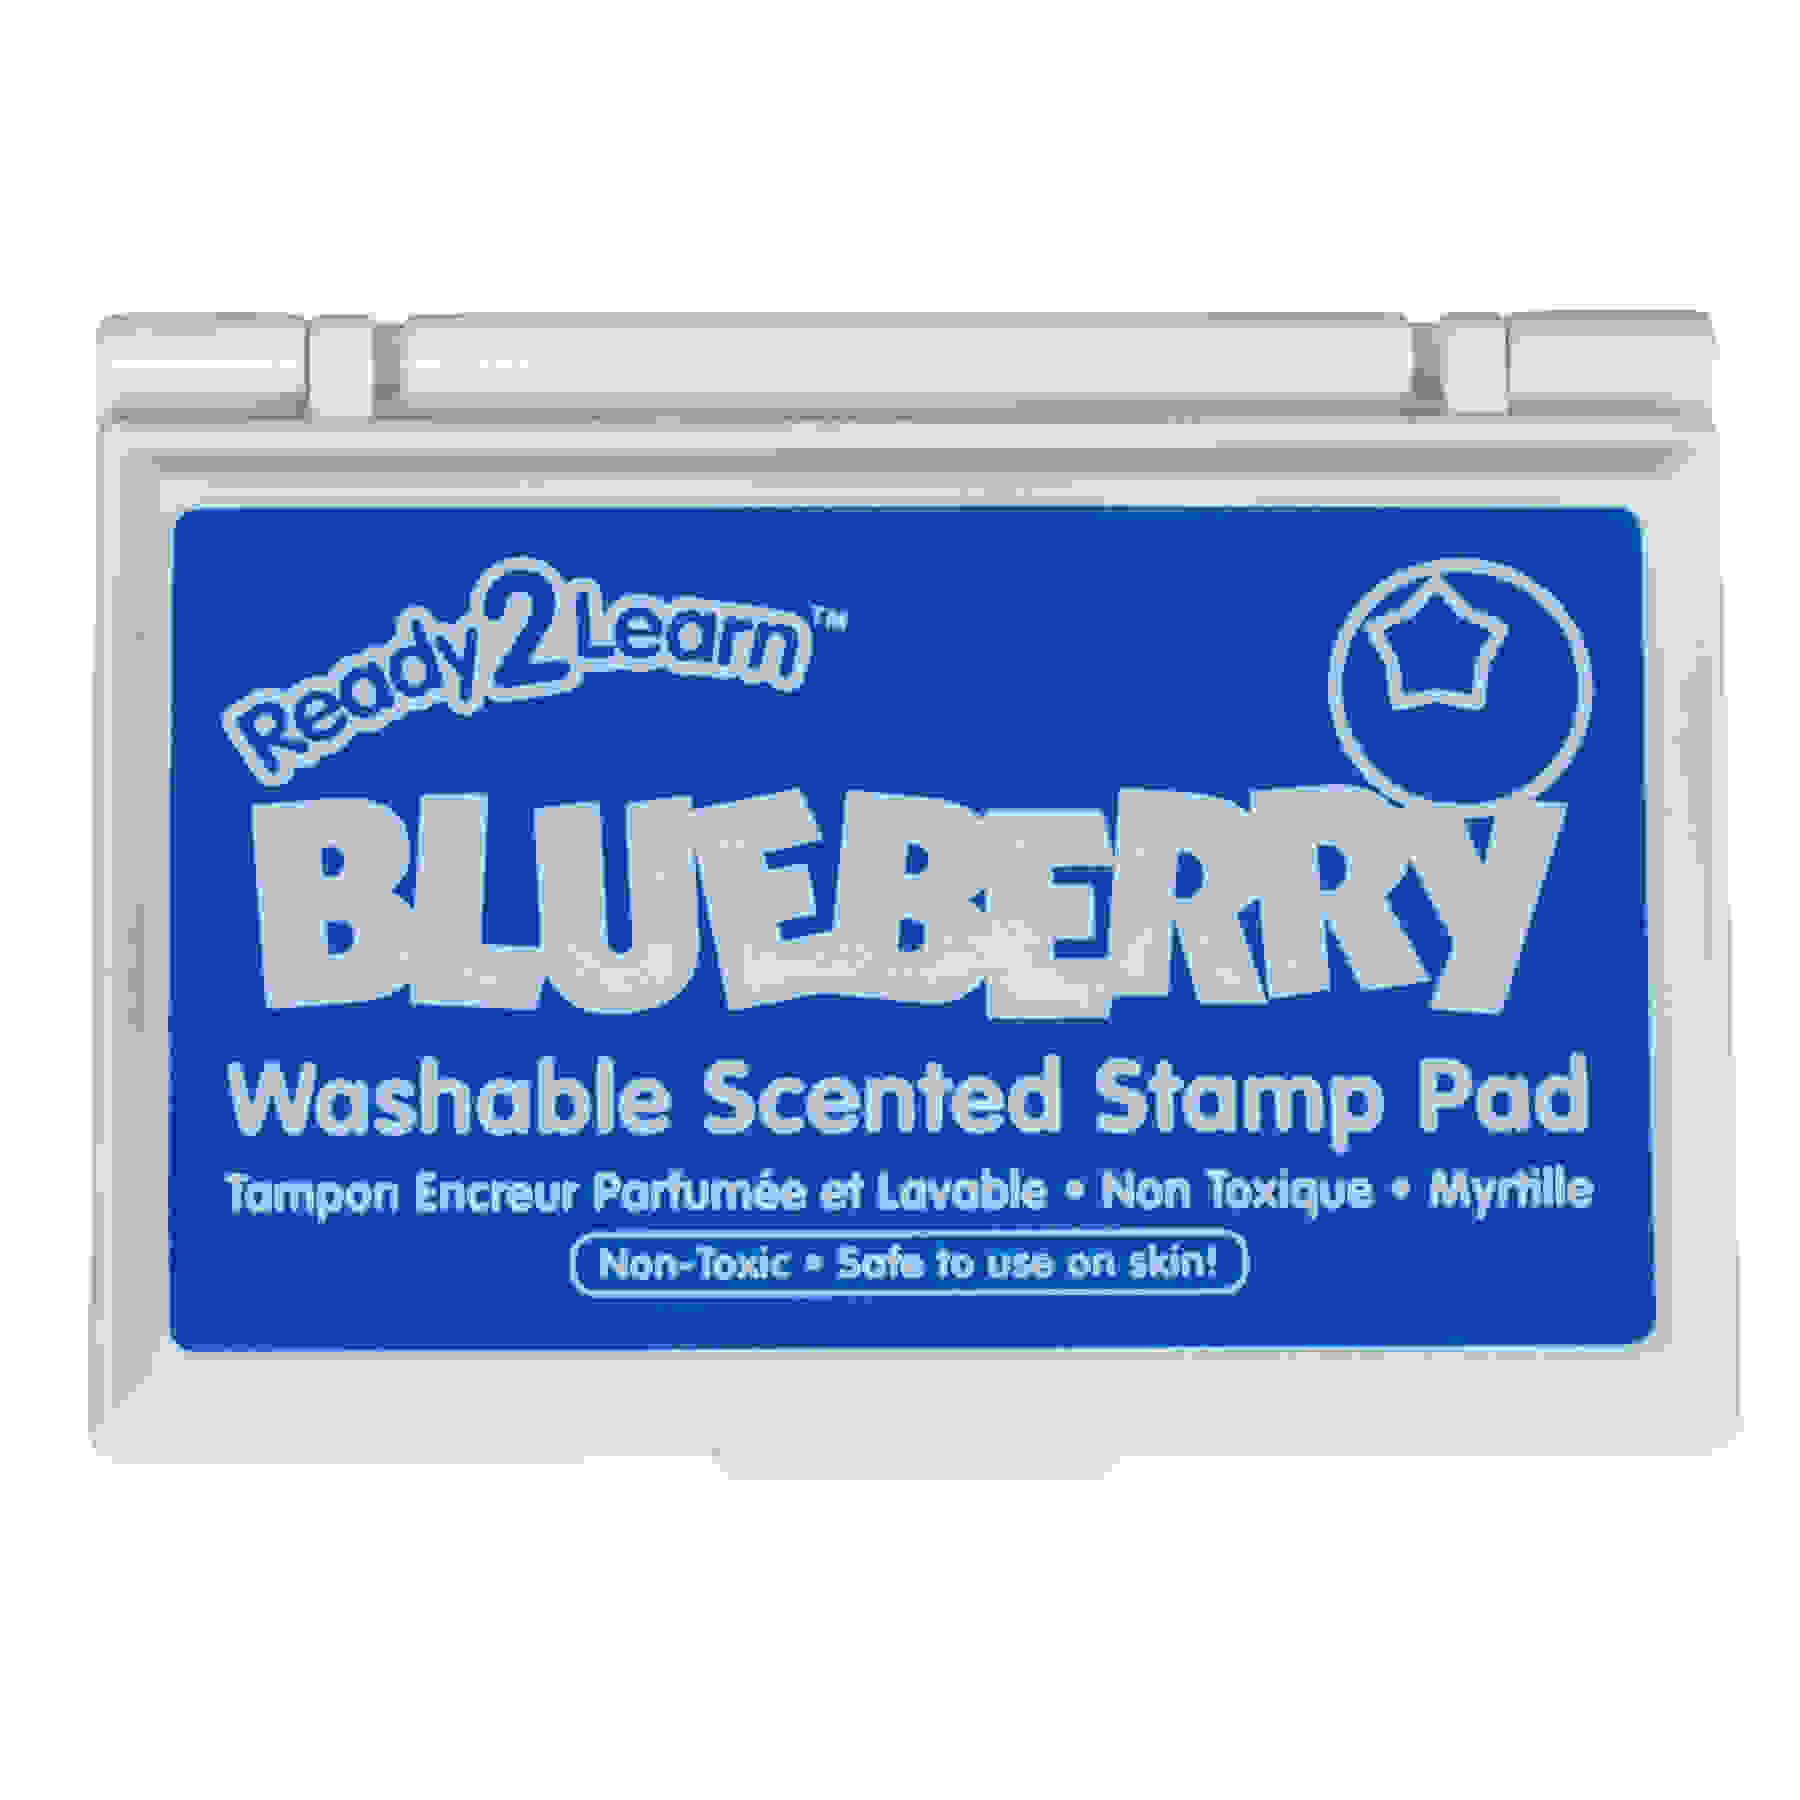 Washable Stamp Pad, Blueberry Scented, Blue